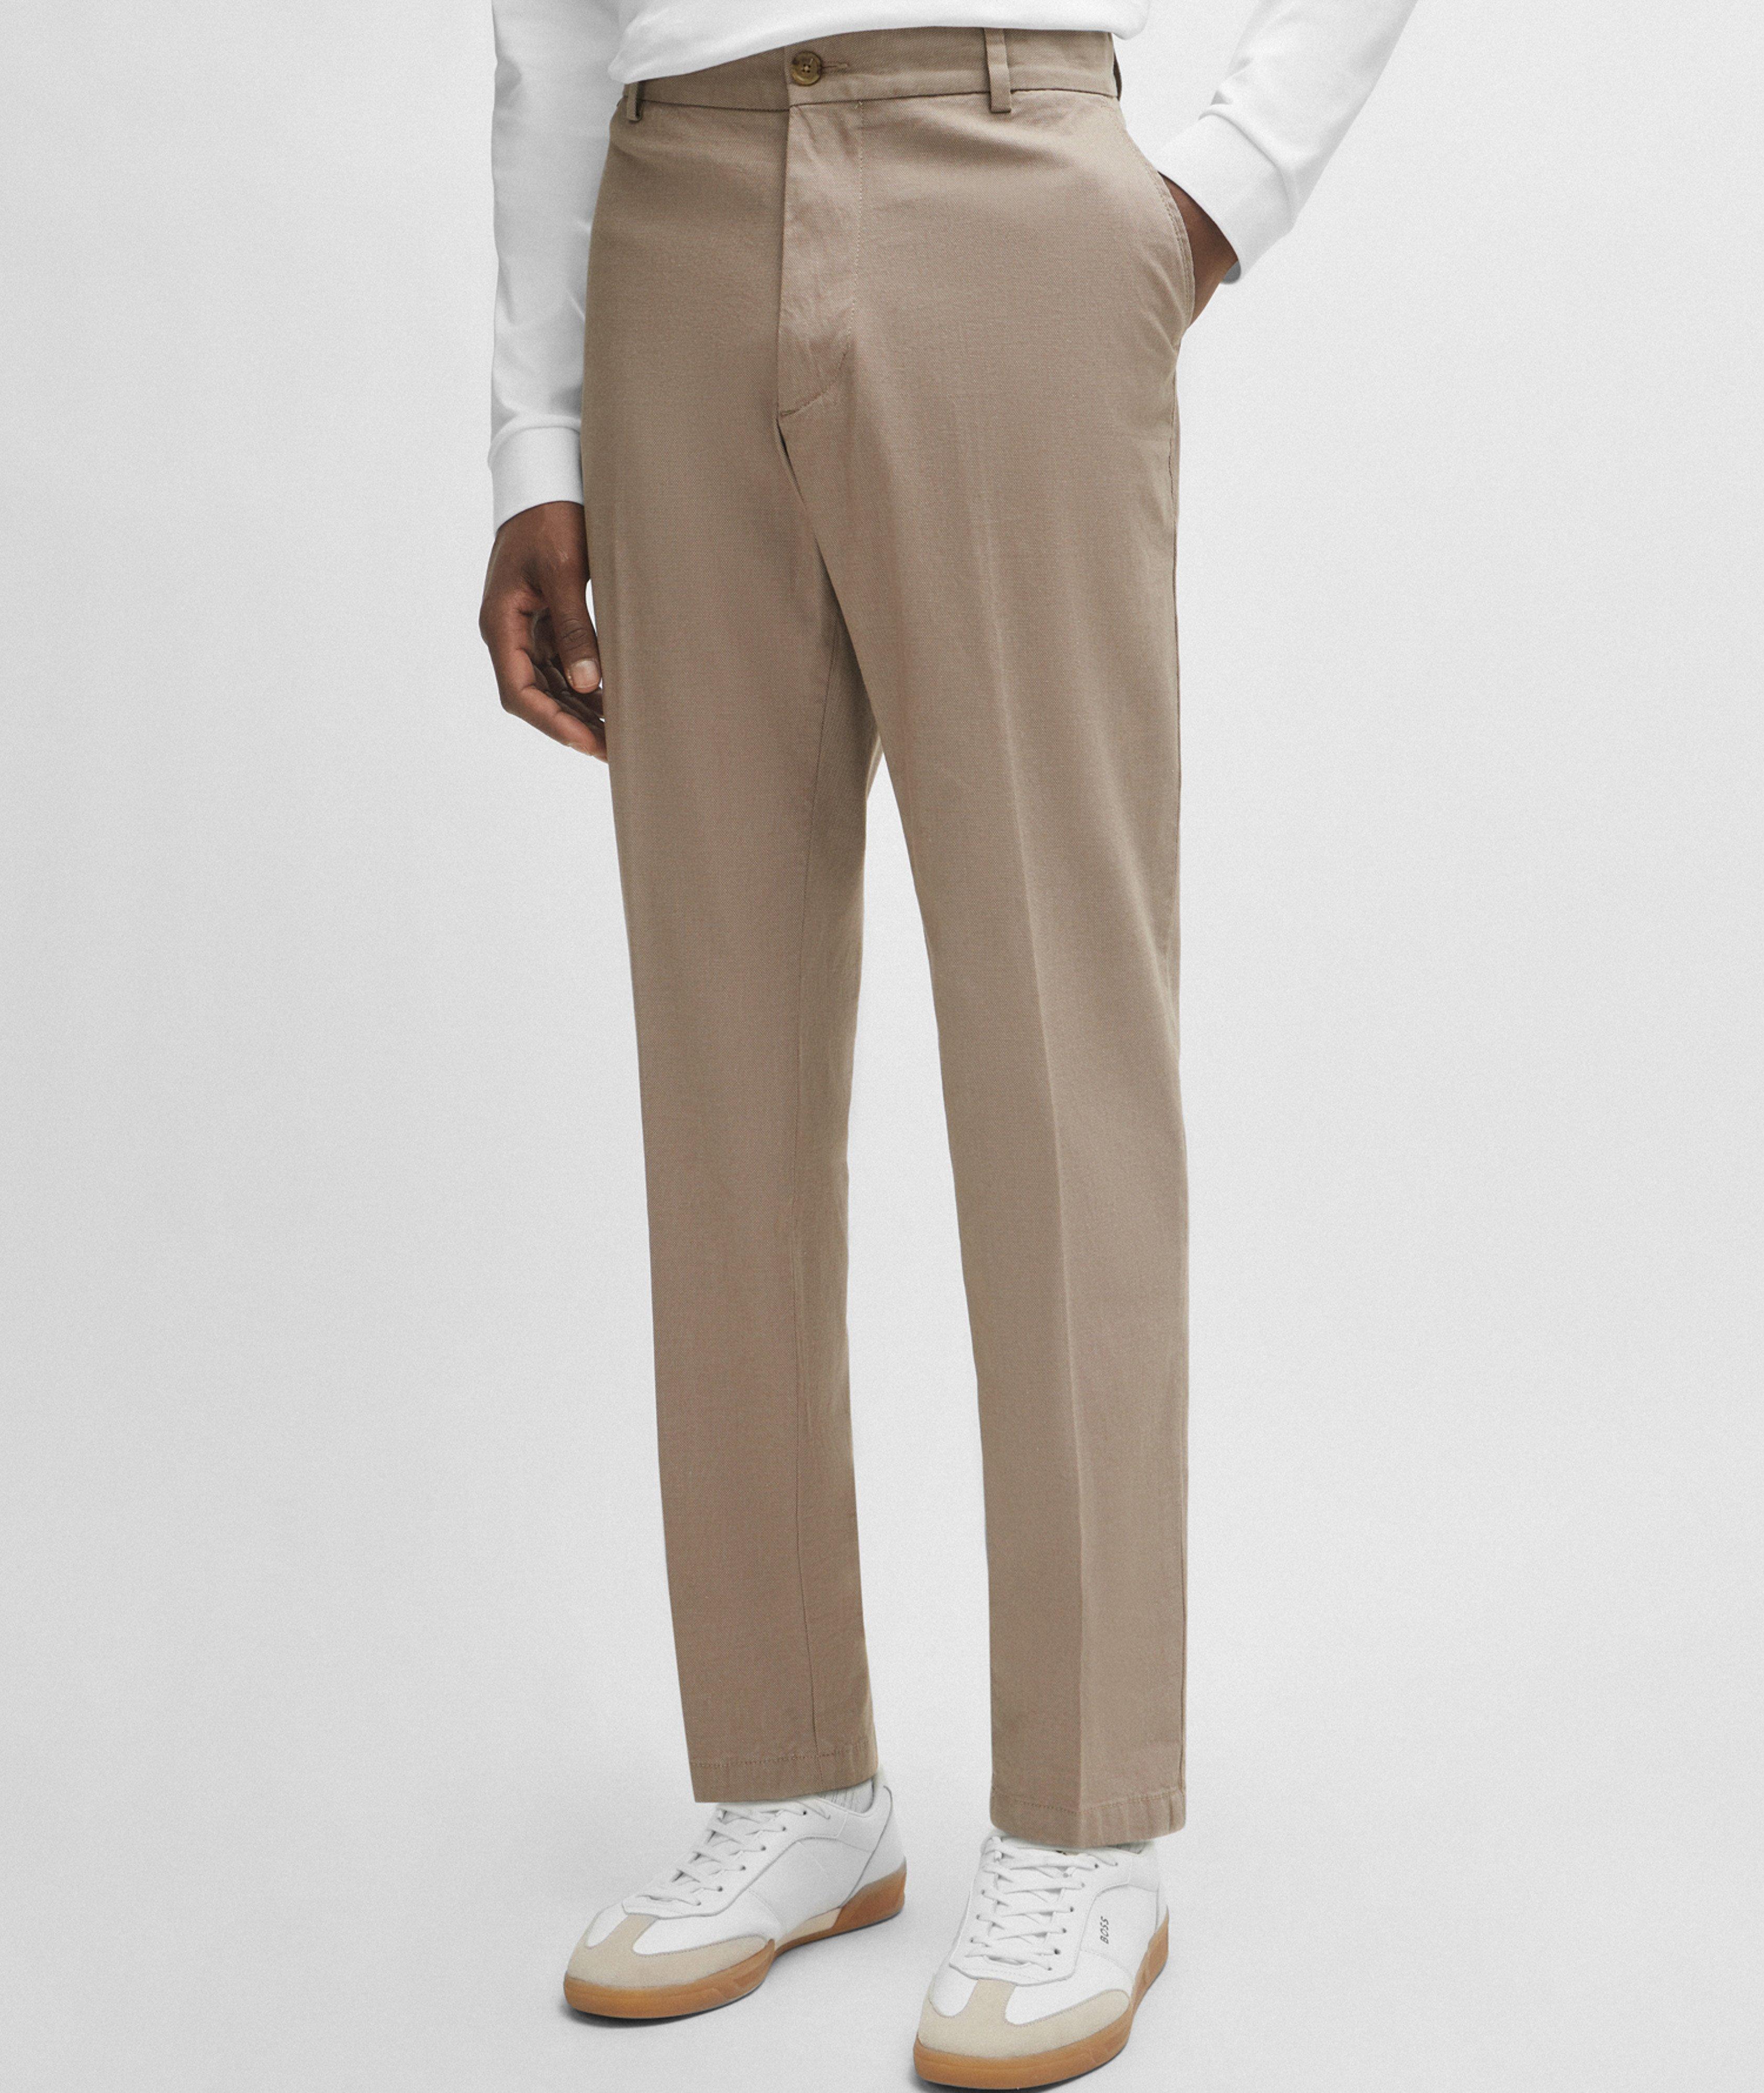 Kane Micro-Patterned Stretch-Cotton Trousers image 2